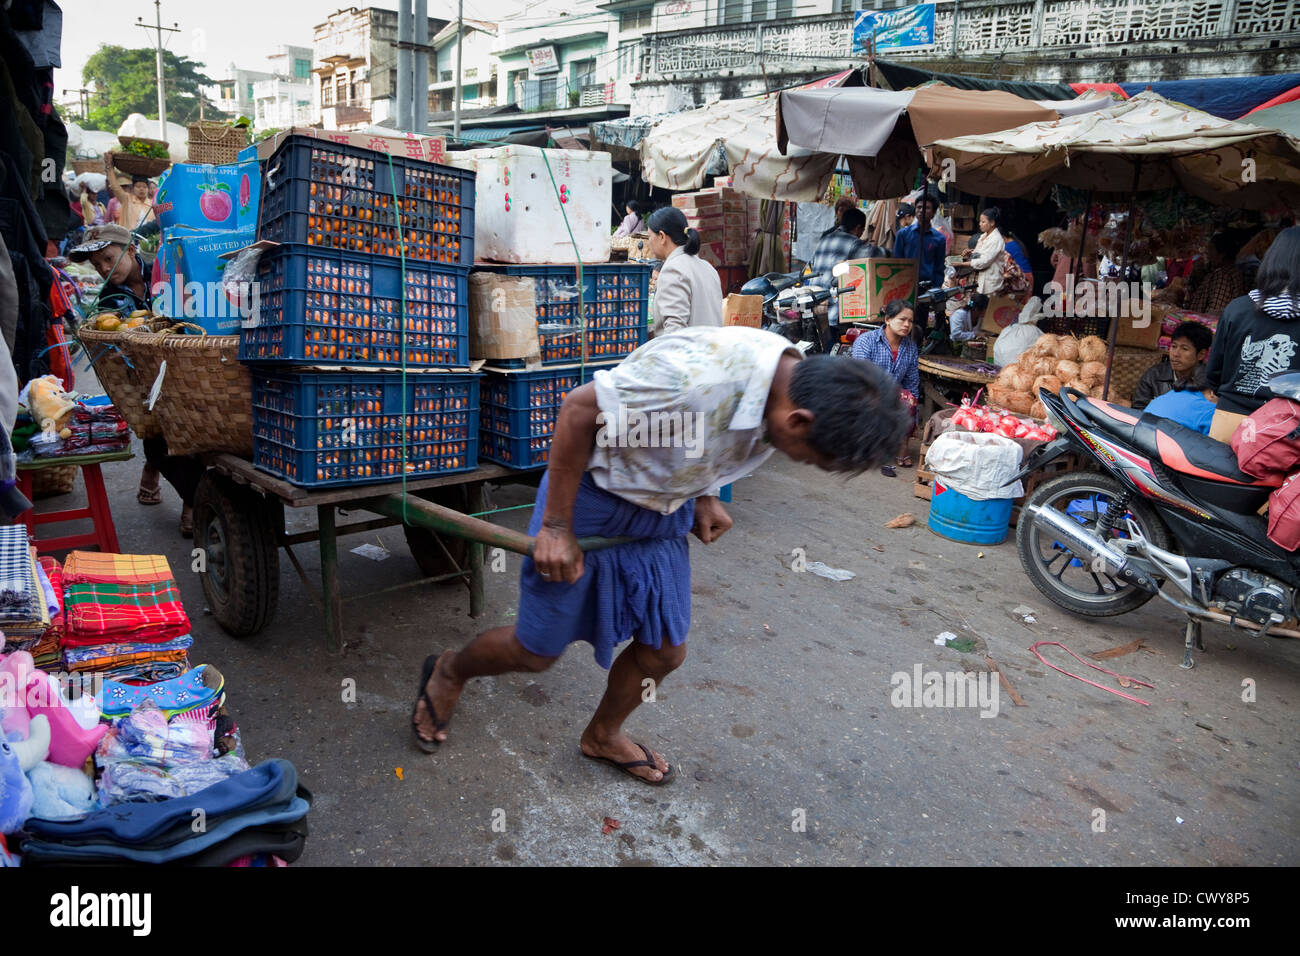 Myanmar, Burma. Mandalay Market Scene. Man Struggles to Pull a Load of Apples and Oranges through the Market Streets. Stock Photo